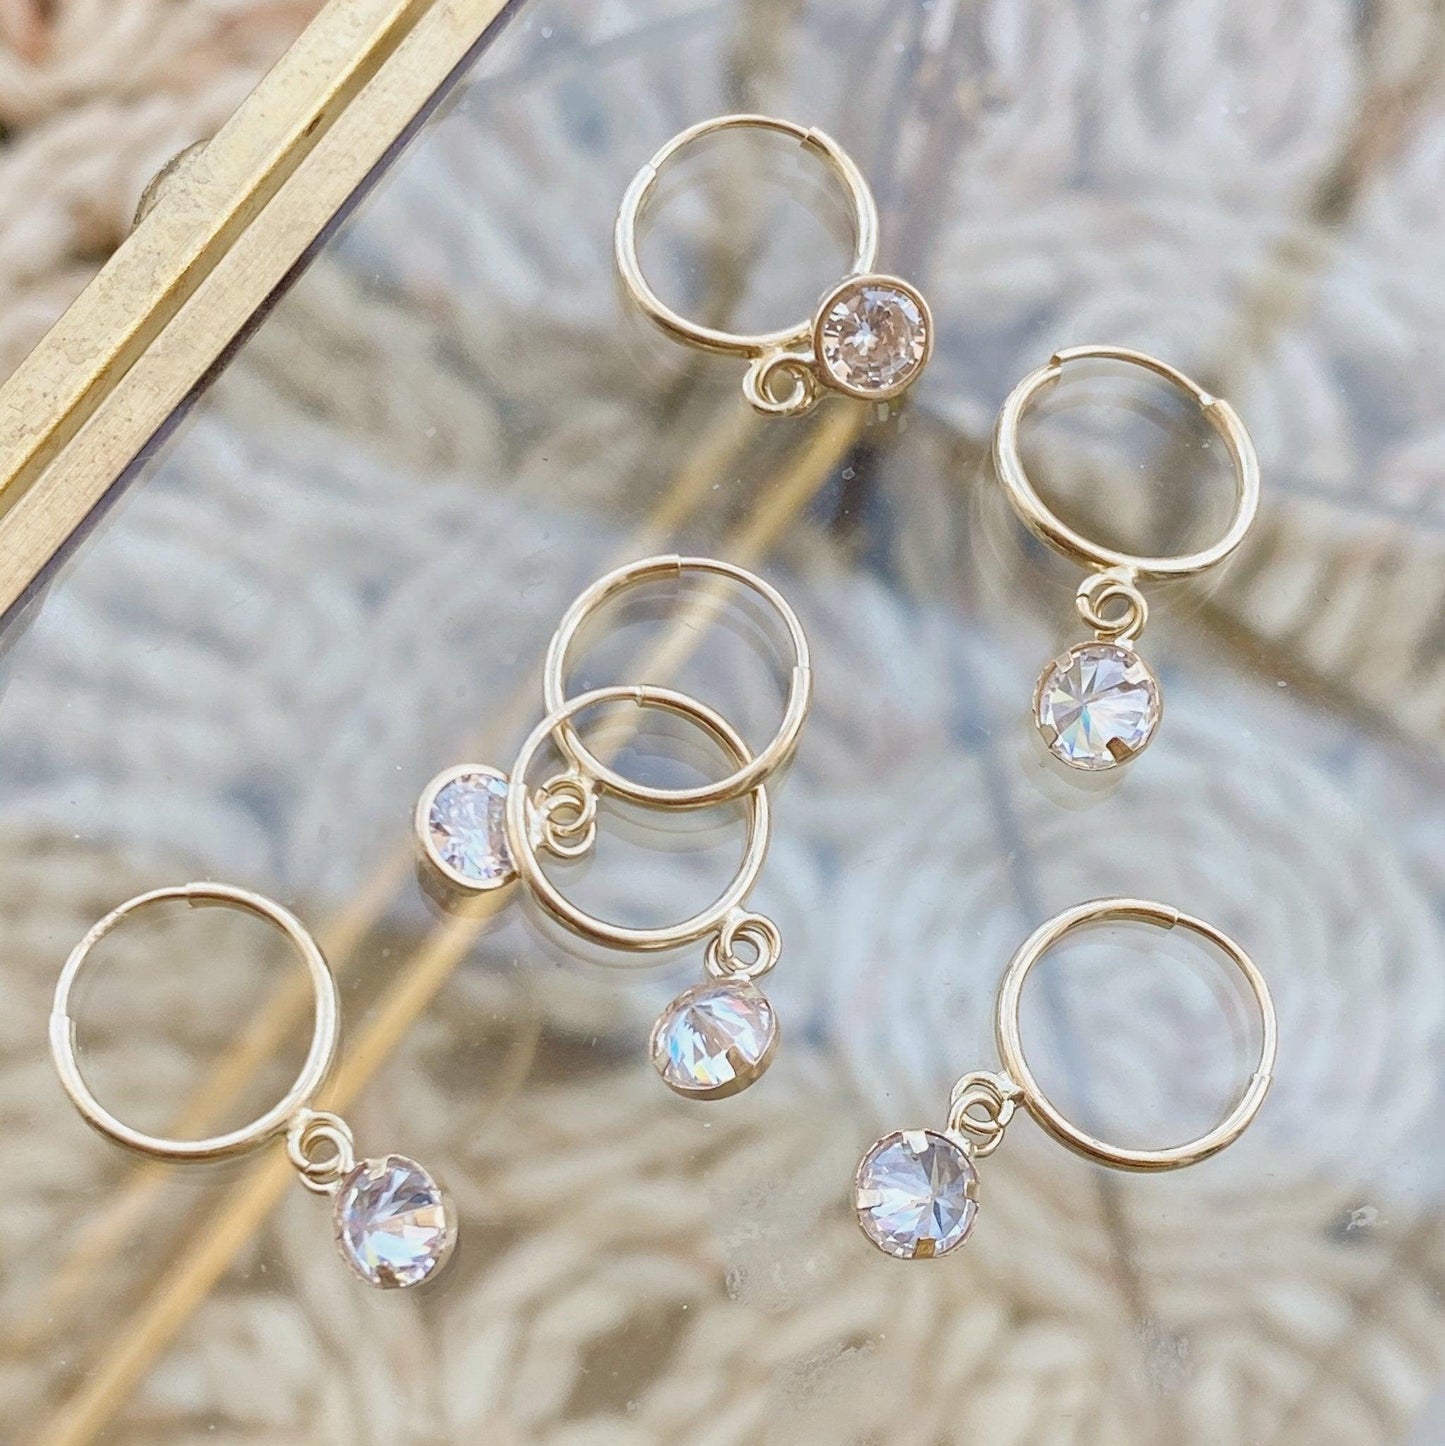 Load image into Gallery viewer, hoop earring with bezel CZ circle,Unique hoop earrings Made from 10K Huggie Hoop Earrings, they fit comfortably in your earlobes and have a beautiful design that is guaranteed to make heads turn when you step out on the town.
